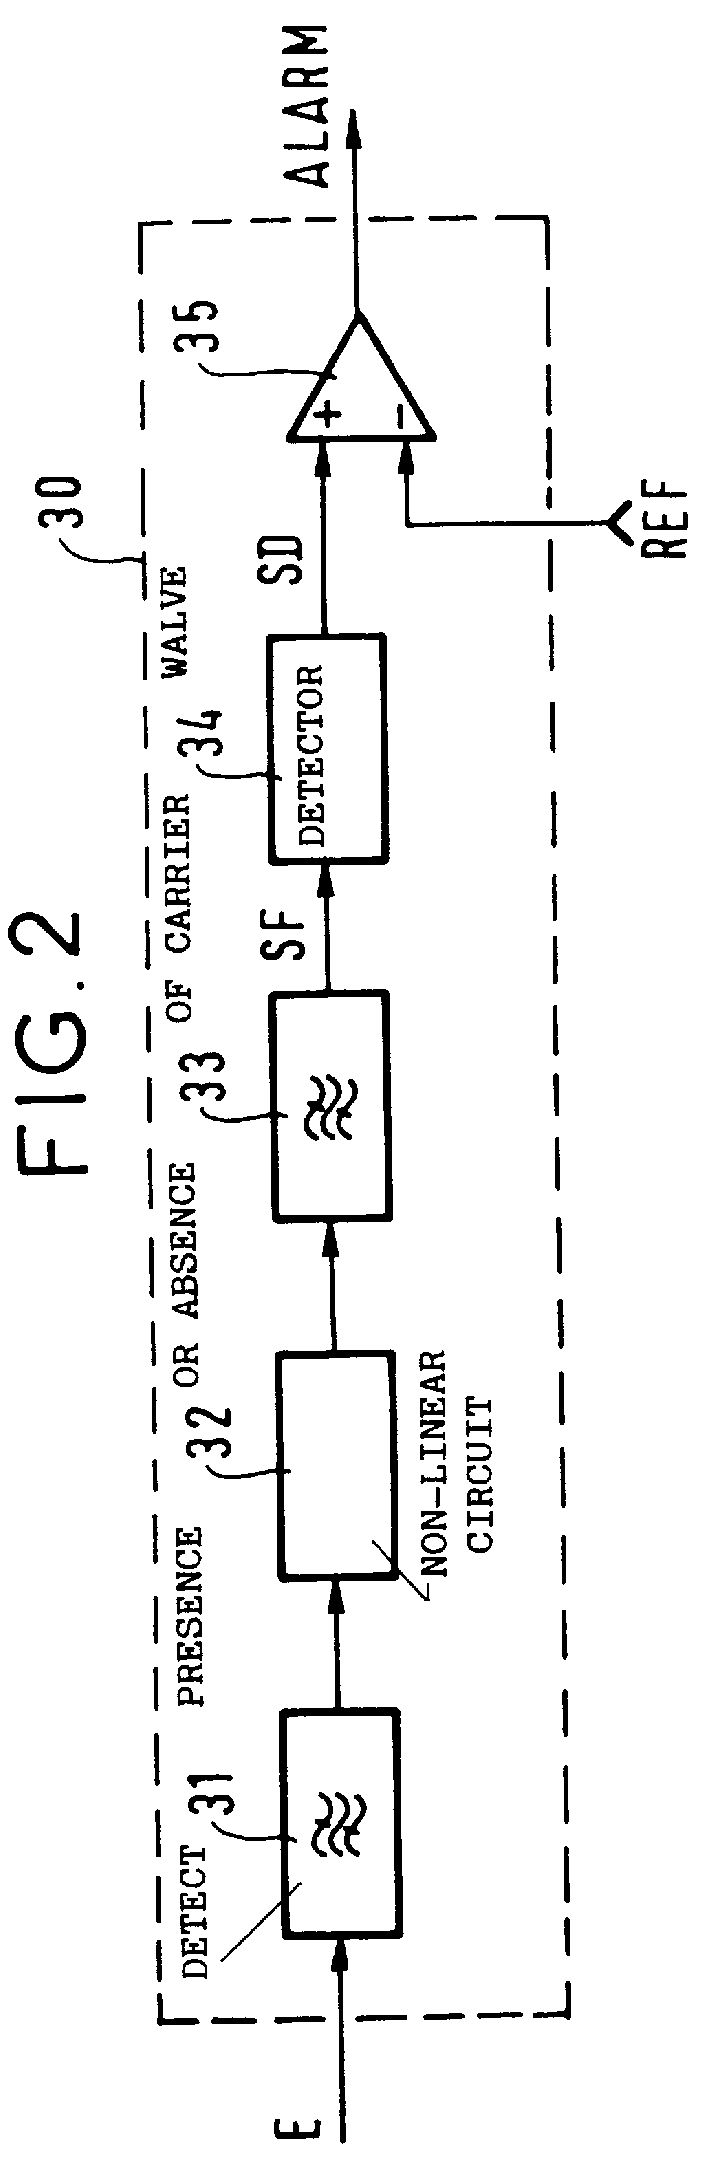 Apparatus for detecting the presence or the absence of a digitally modulated carrier, a corresponding receiver, and a corresponding method